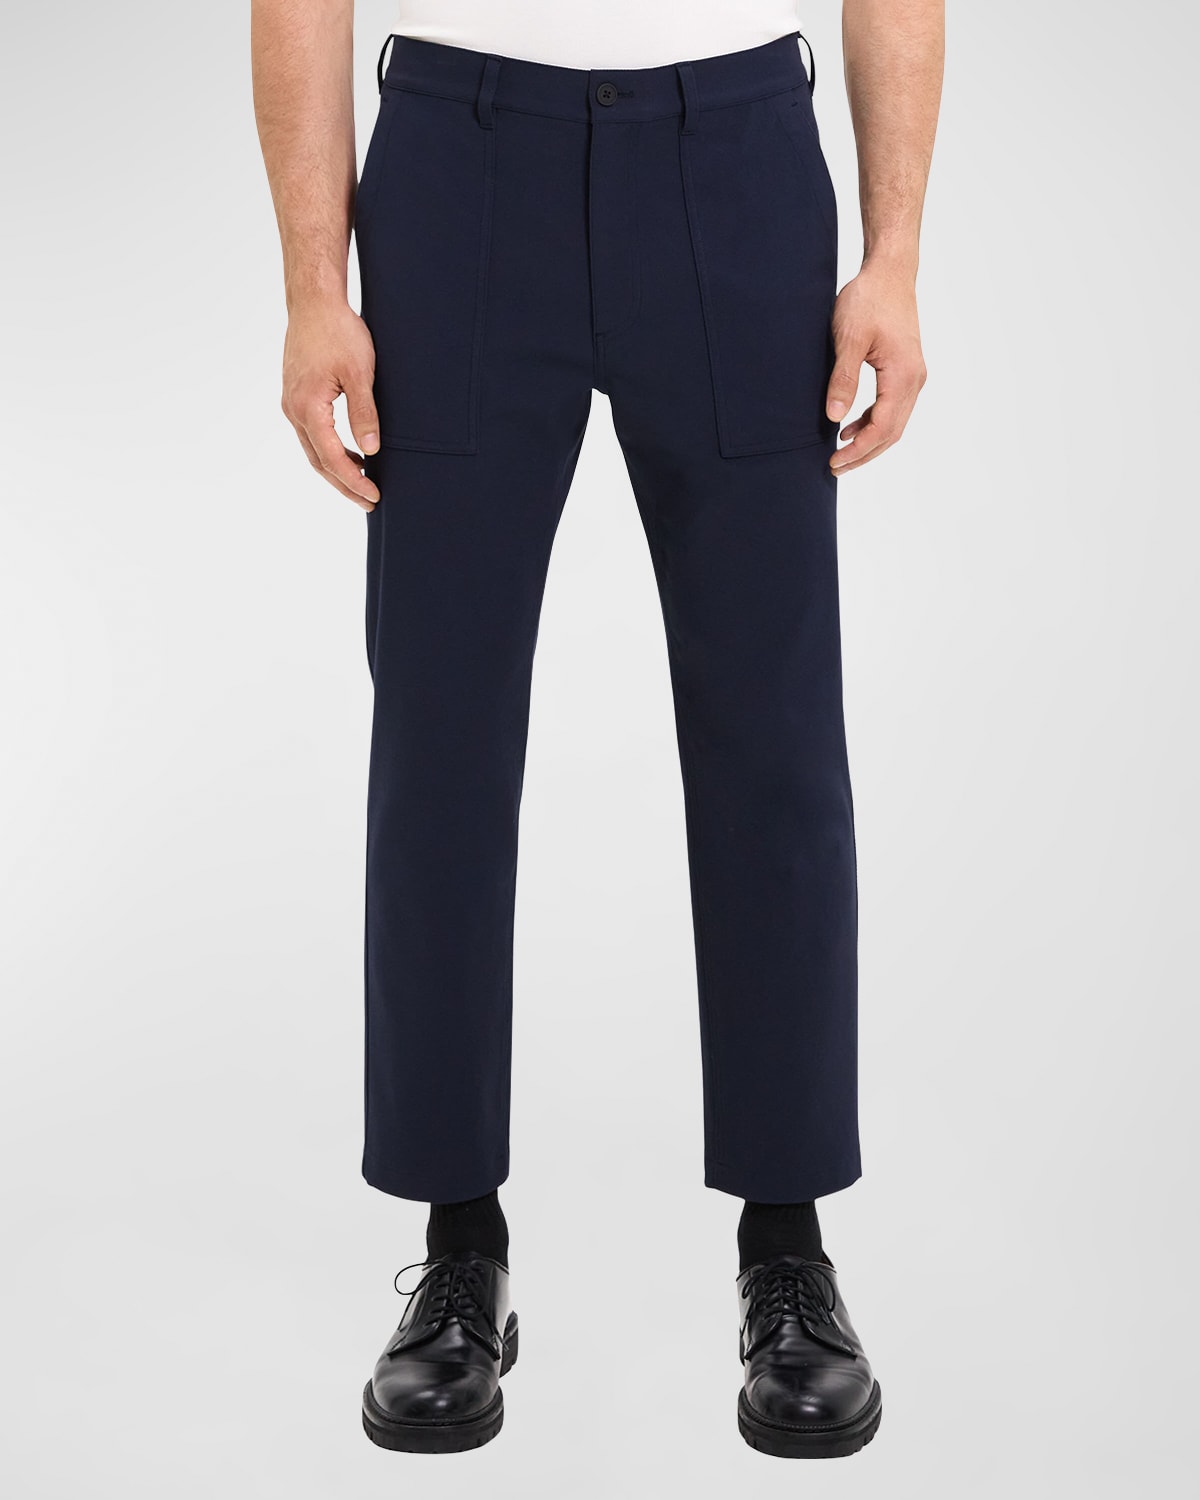 Theory Men's Fatigue Pants in Neoteric